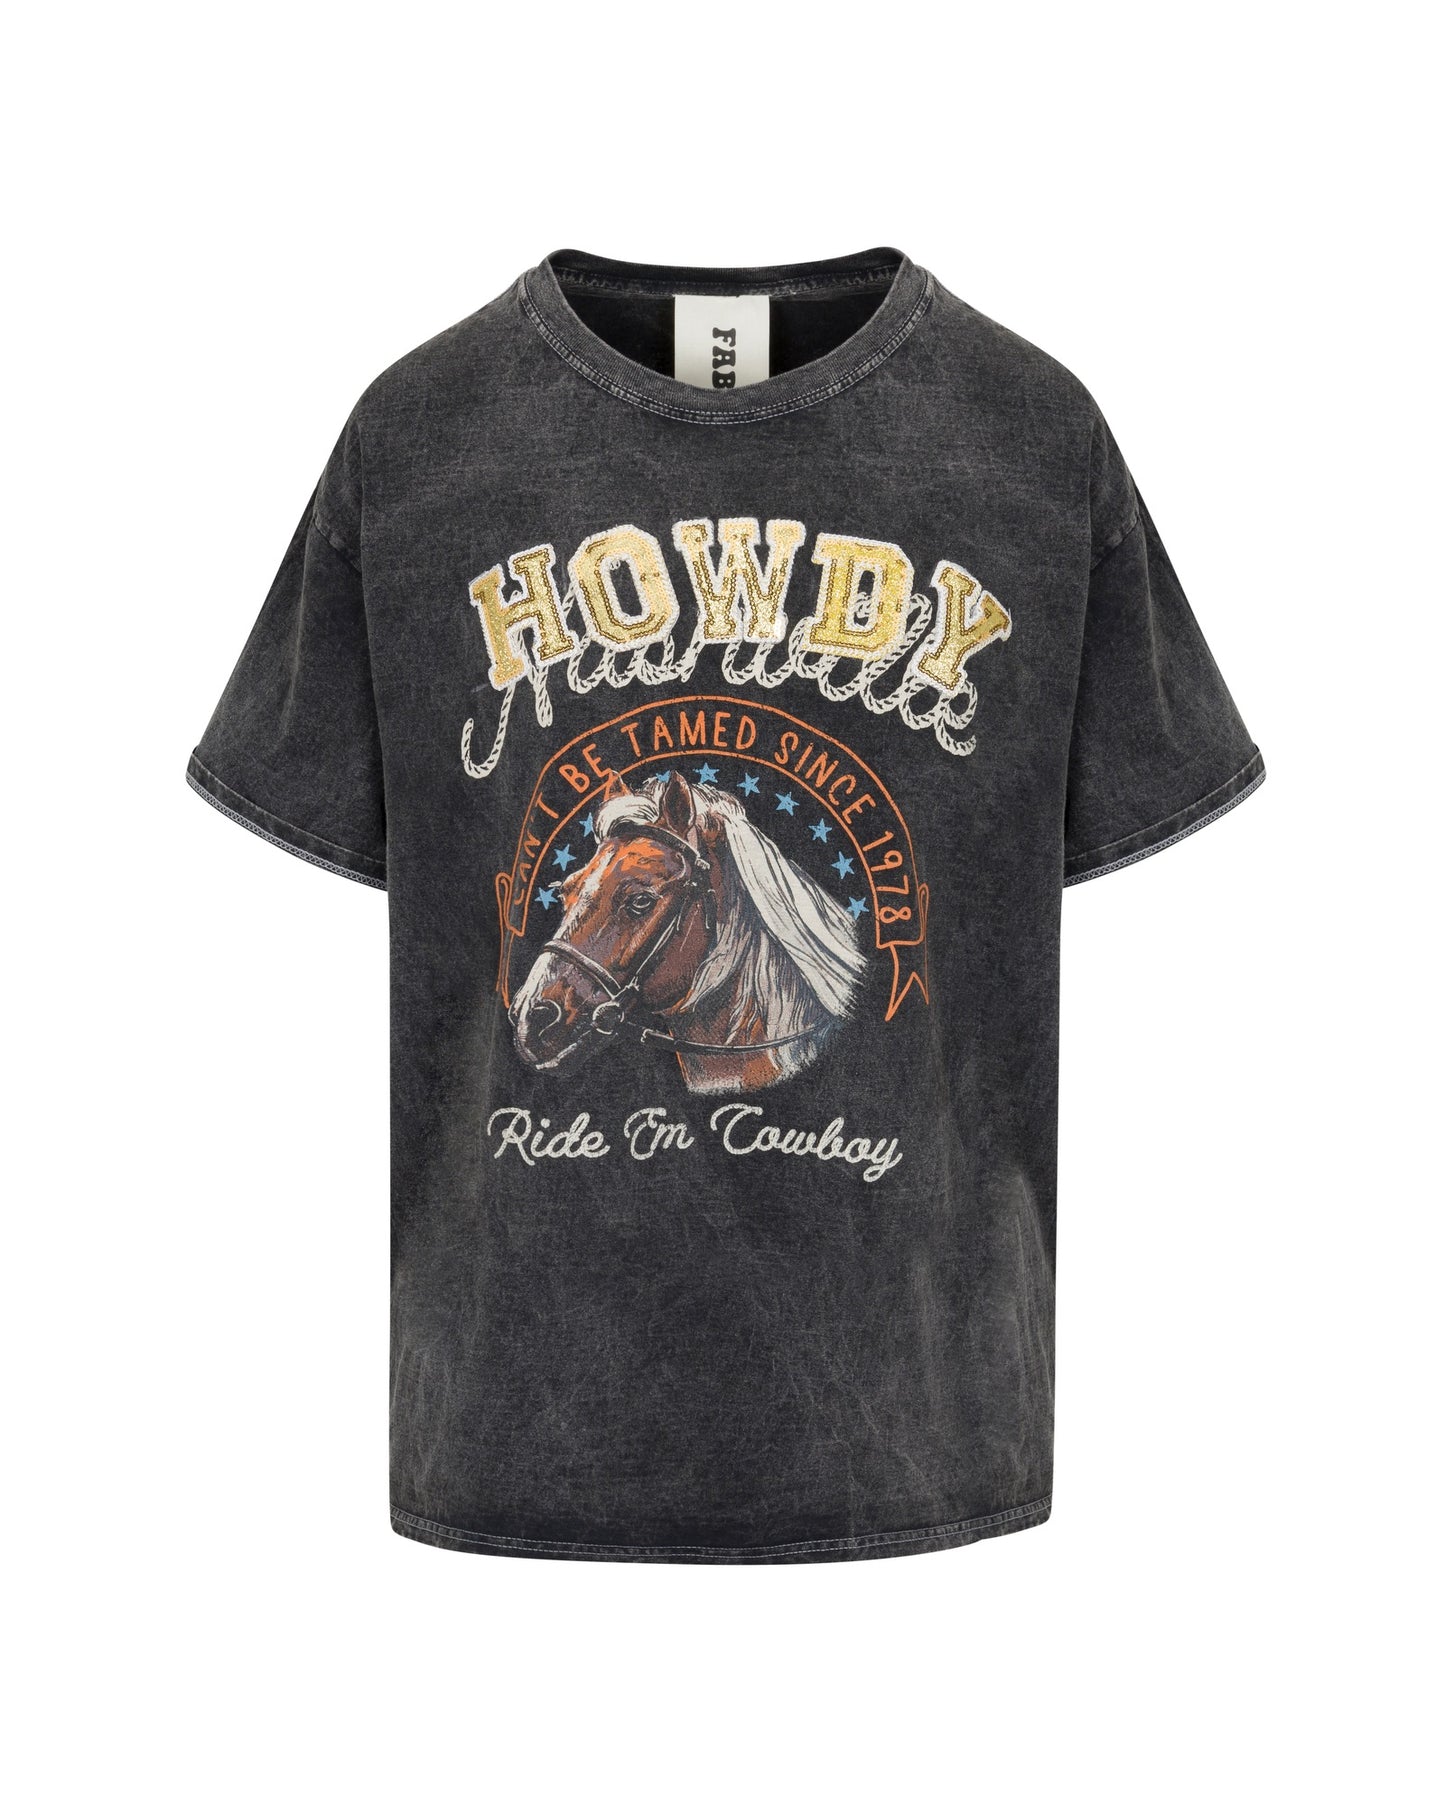 Howdy Cowgirl Vintage T-Shirt